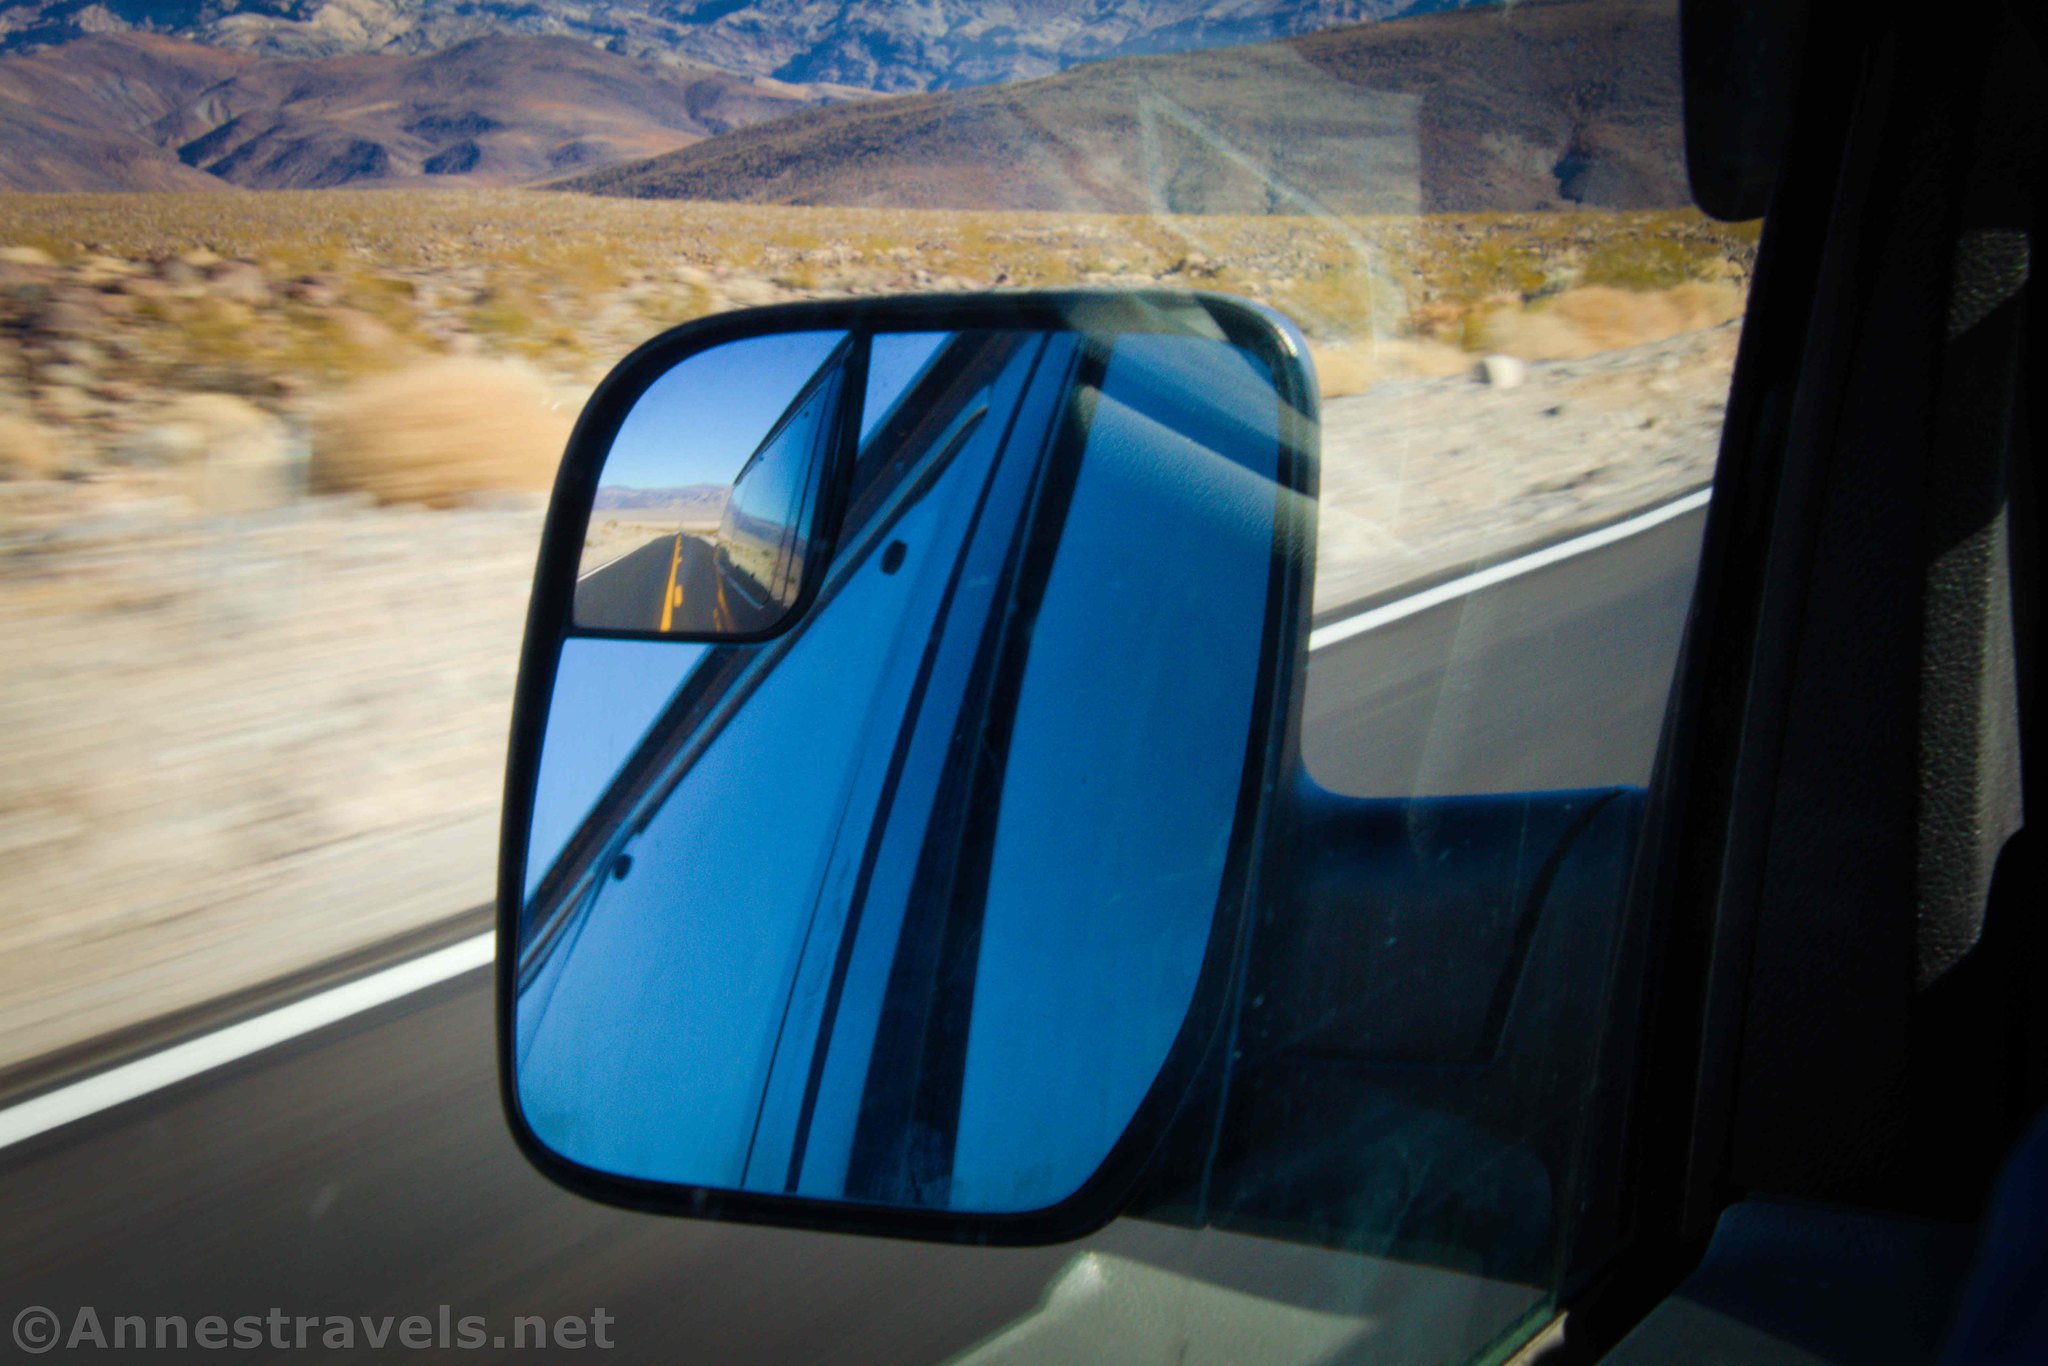 Driving CA-190 in Panamint Valley, Death Valley National Park, California